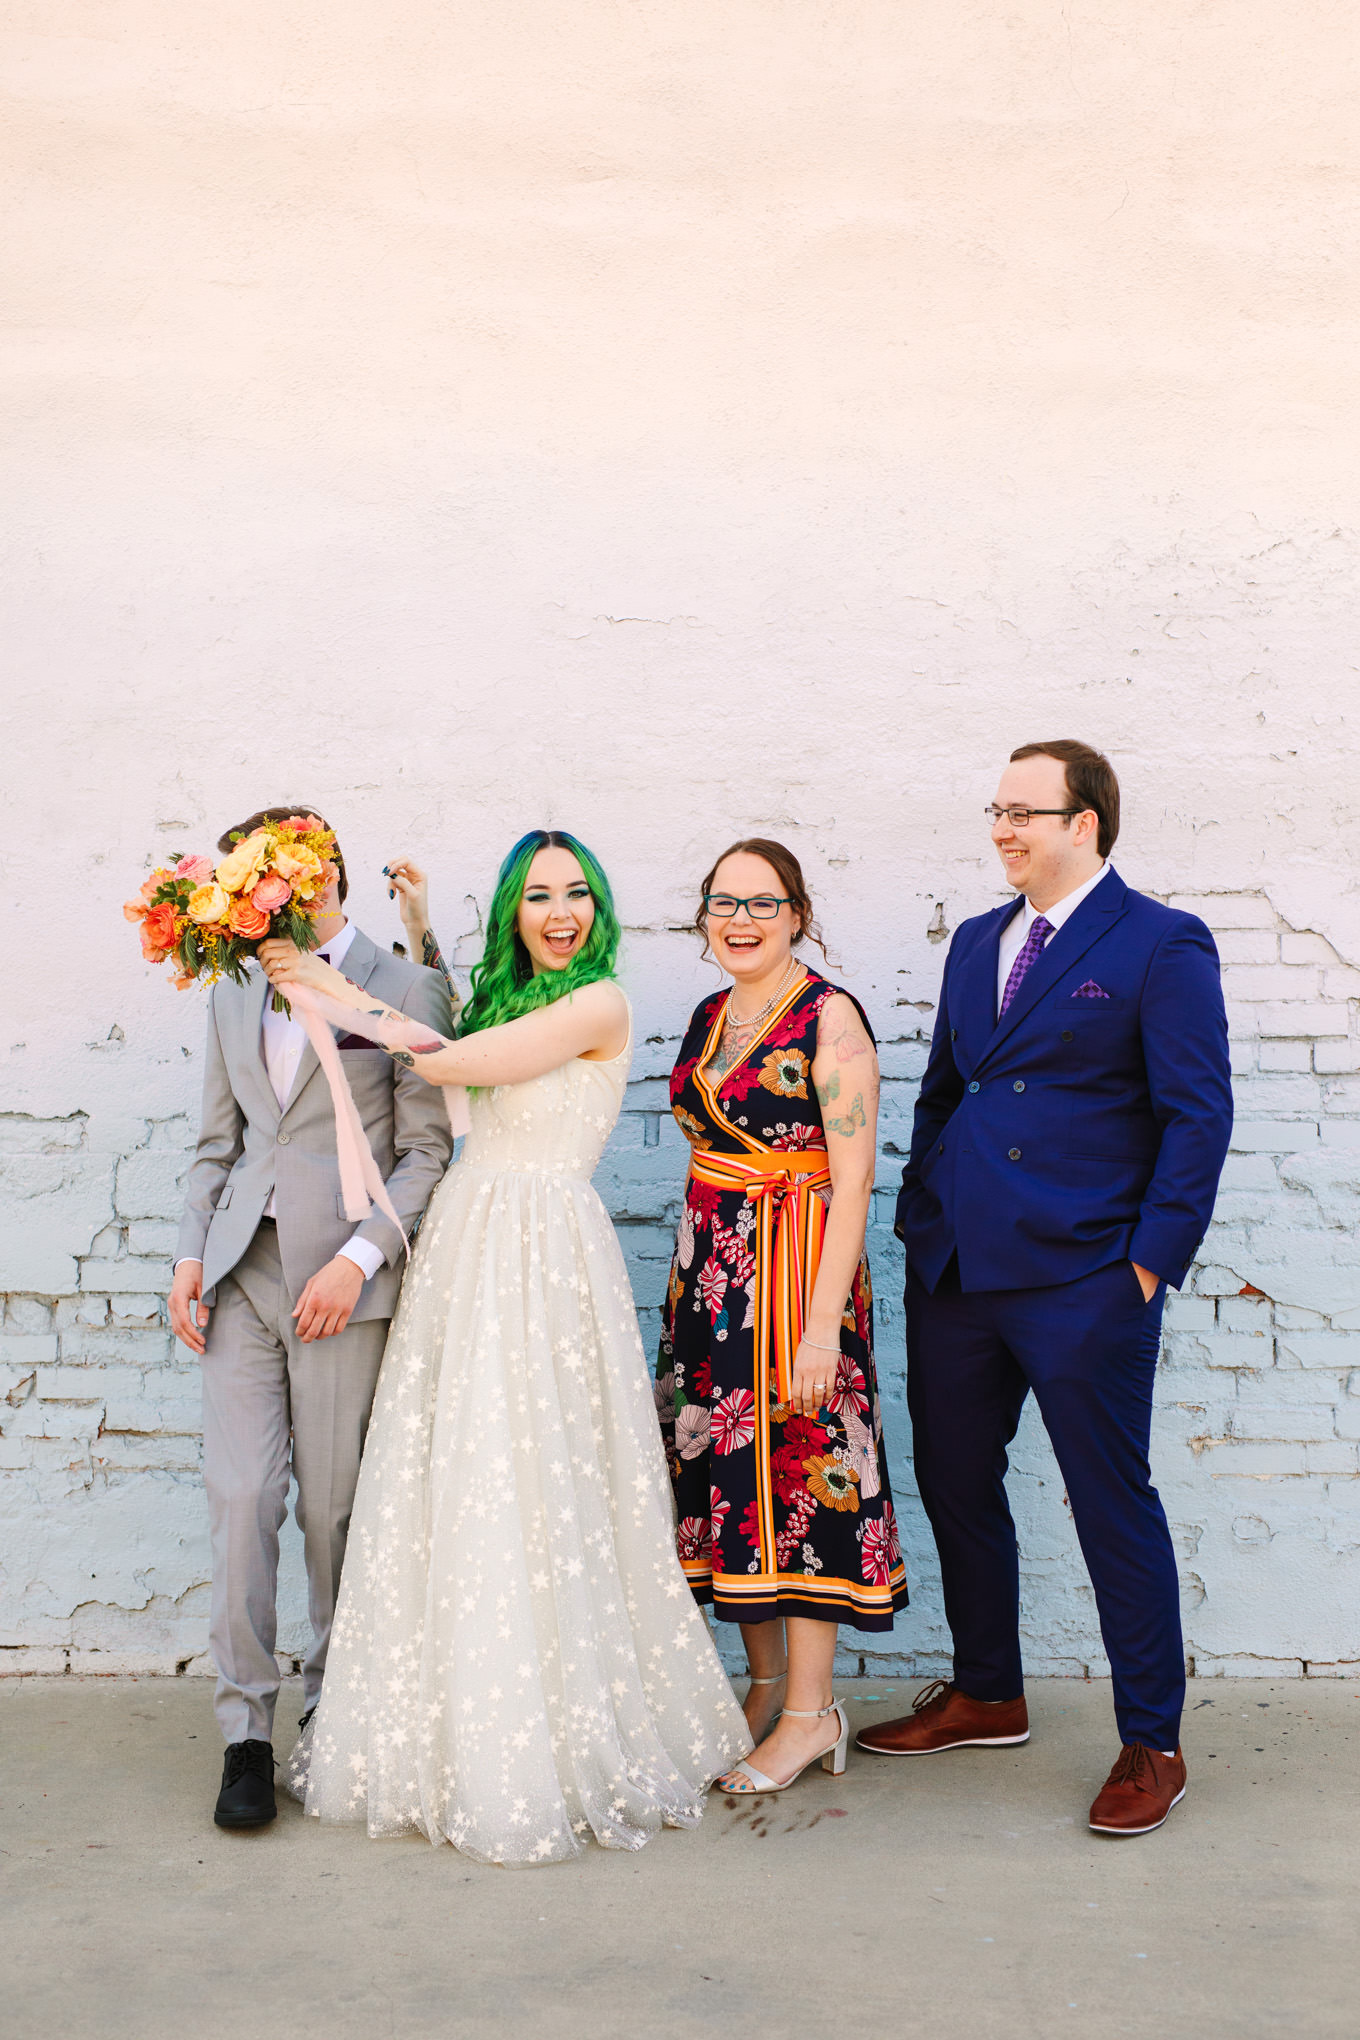 Playful family photo | Colorful wedding at The Unique Space Los Angeles published in The Knot Magazine | Fresh and colorful photography for fun-loving couples in Southern California | #colorfulwedding #losangeleswedding #weddingphotography #uniquespace Source: Mary Costa Photography | Los Angeles